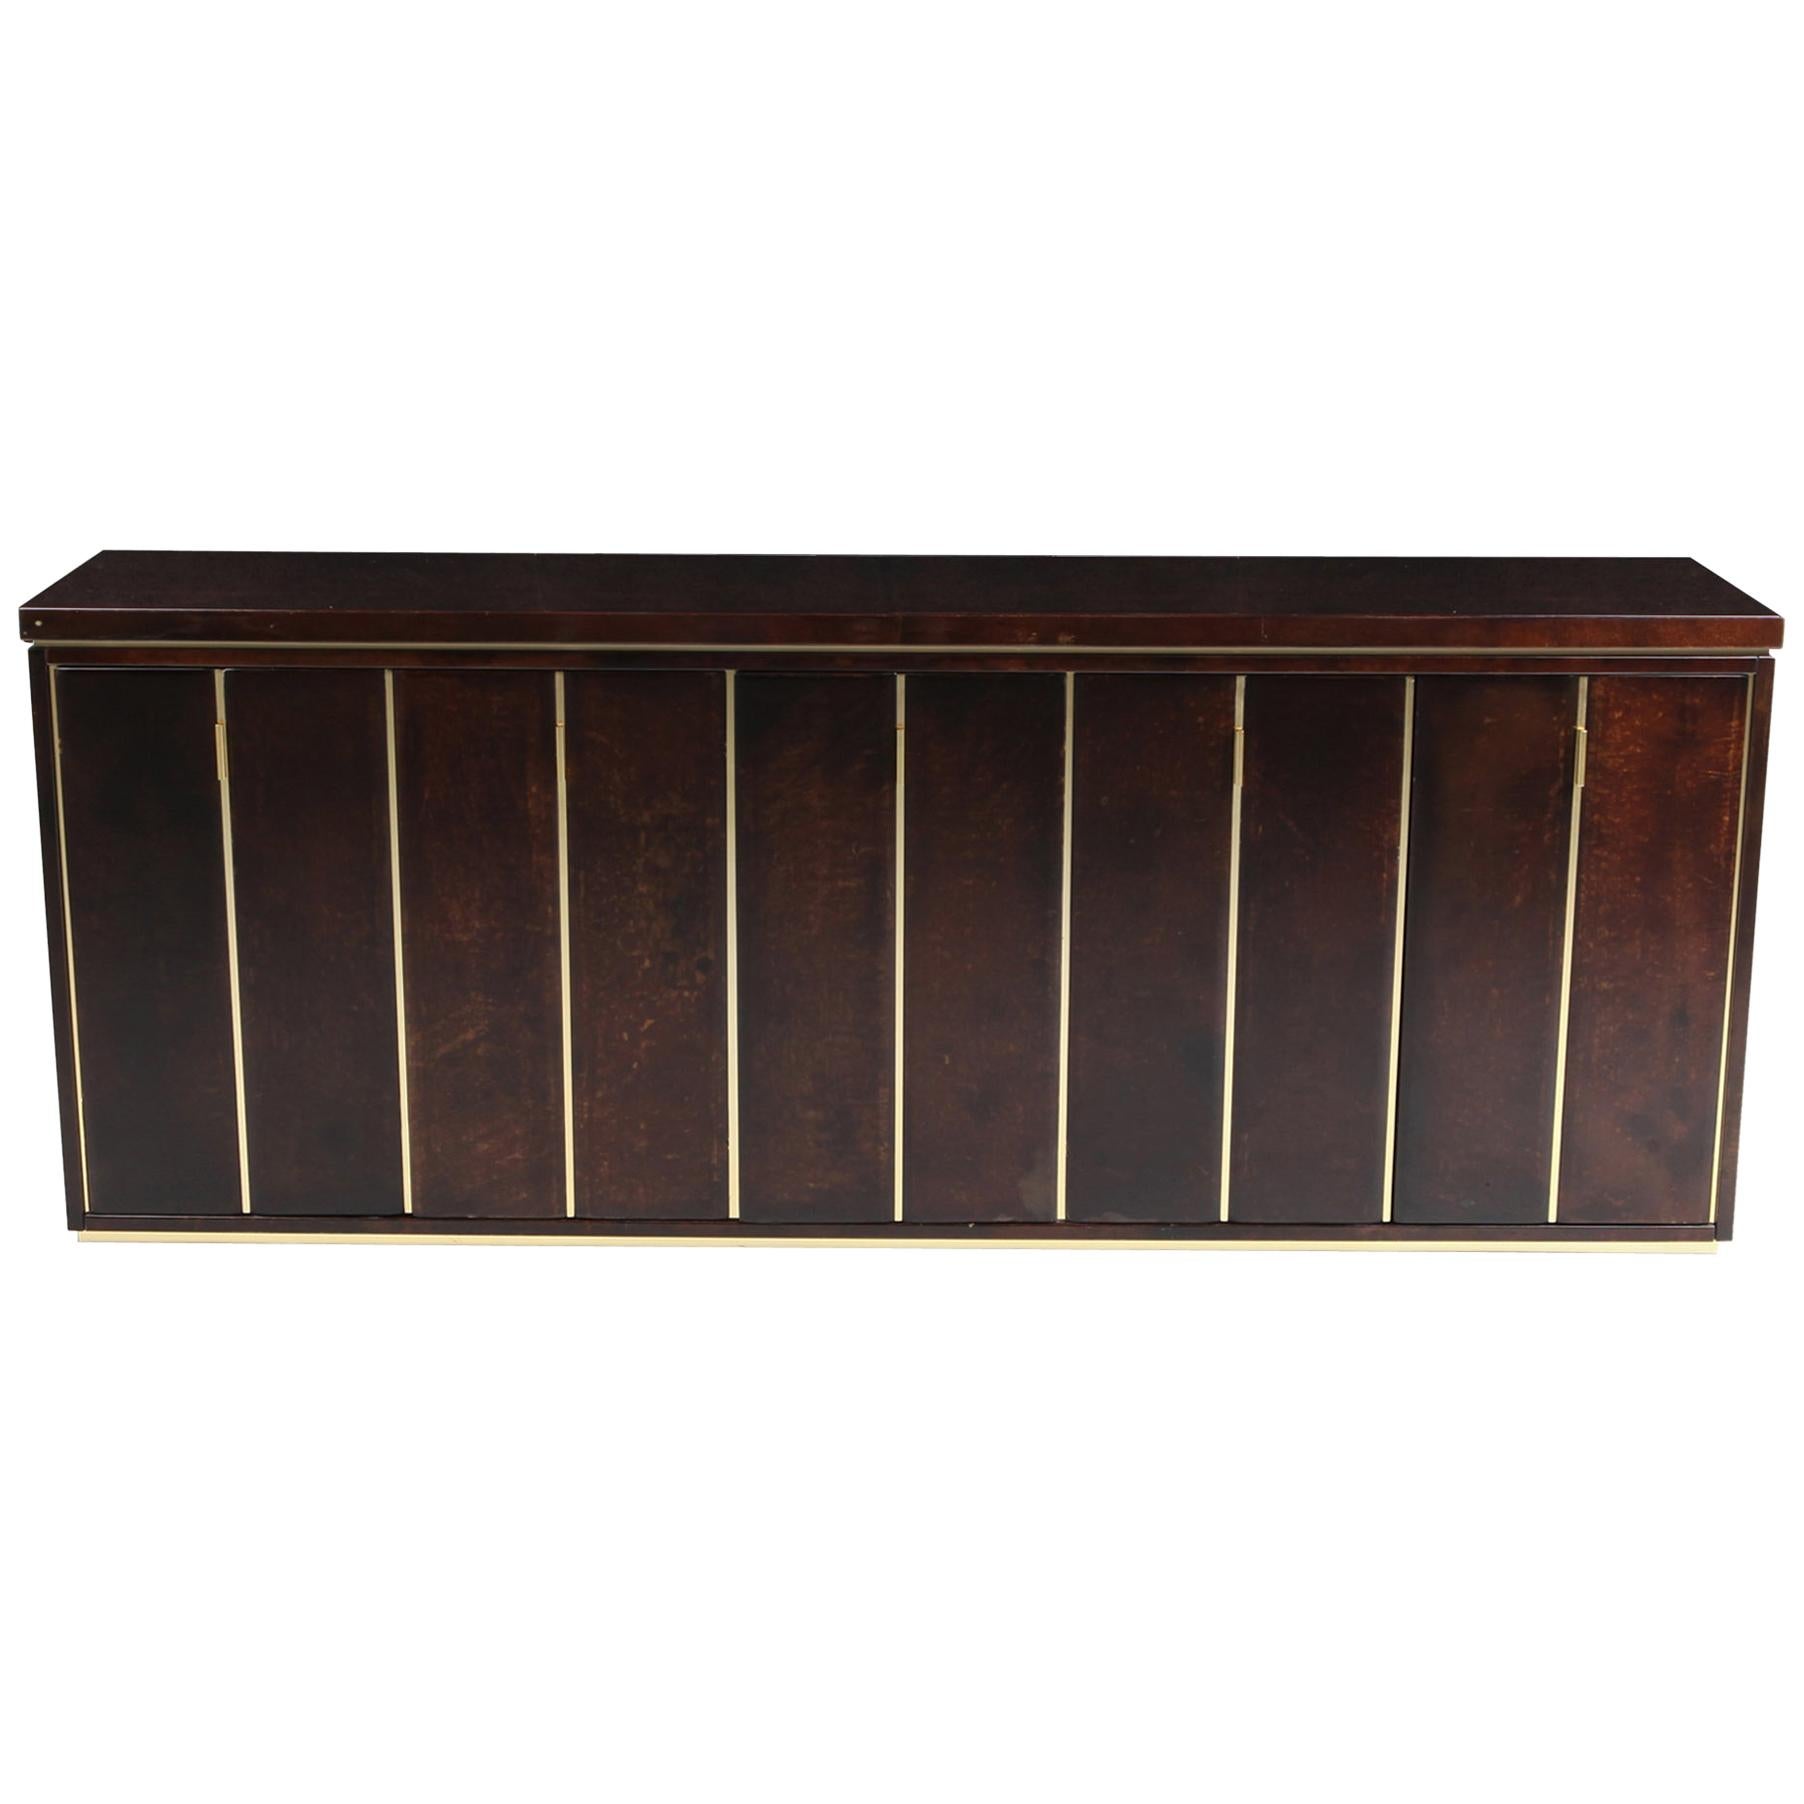 Aldo Tura High End Credenza in Brass and Parchment